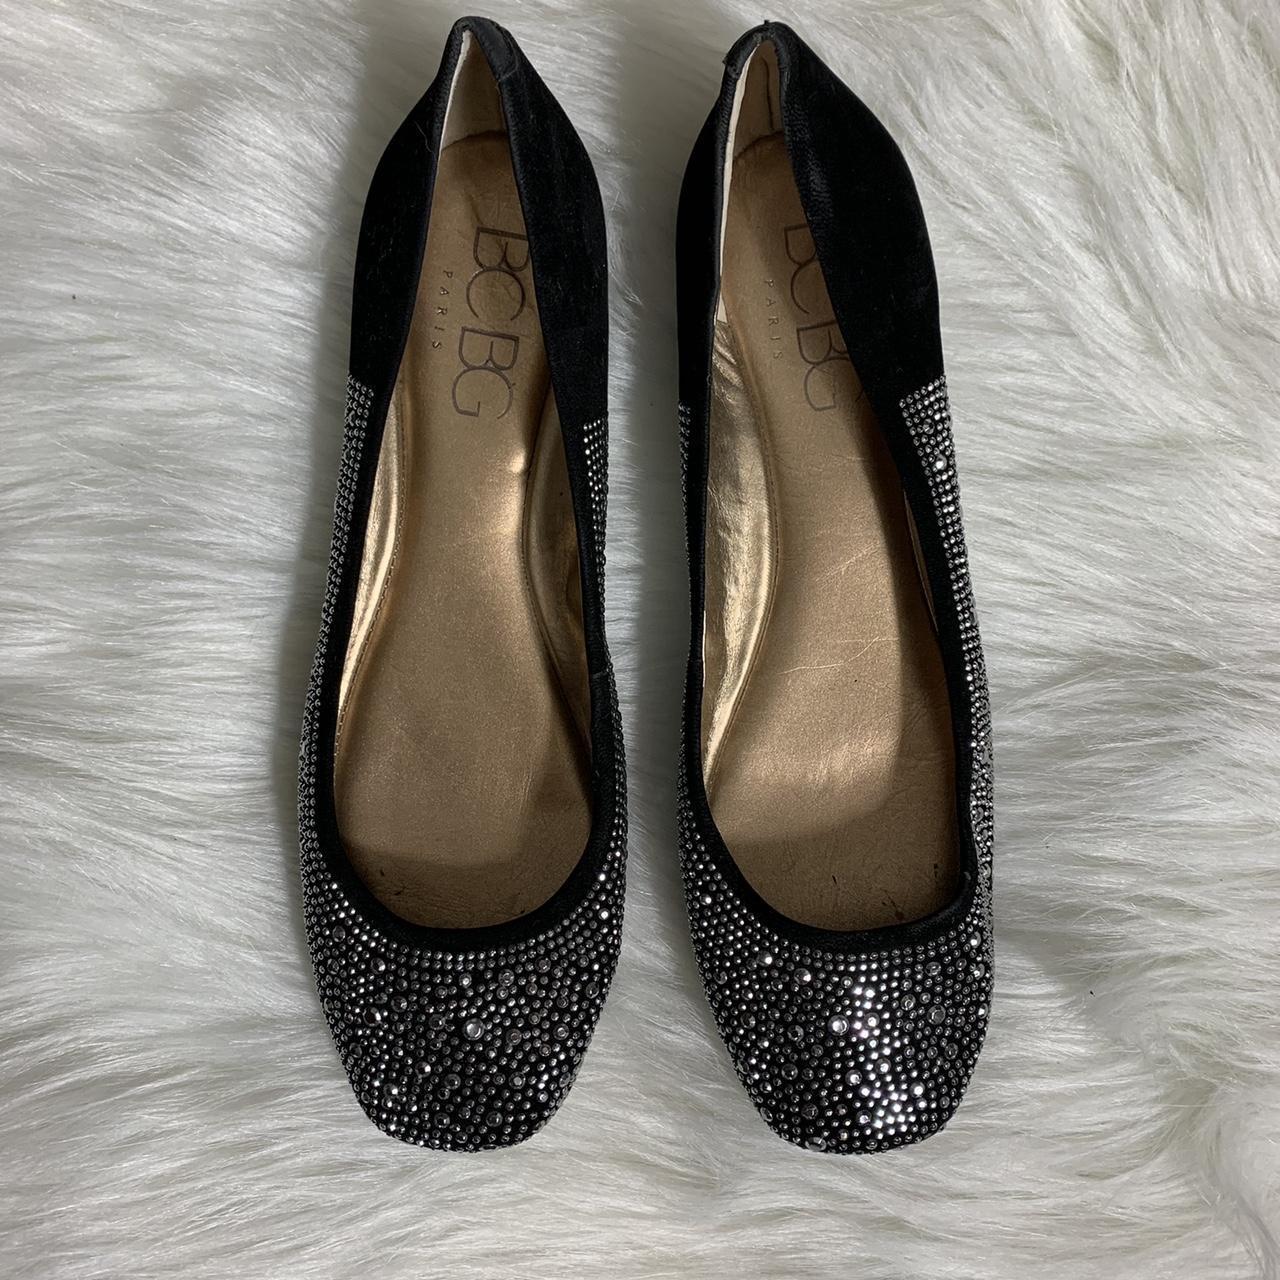 These black suede BCBG flats have a squared off toe,... - Depop